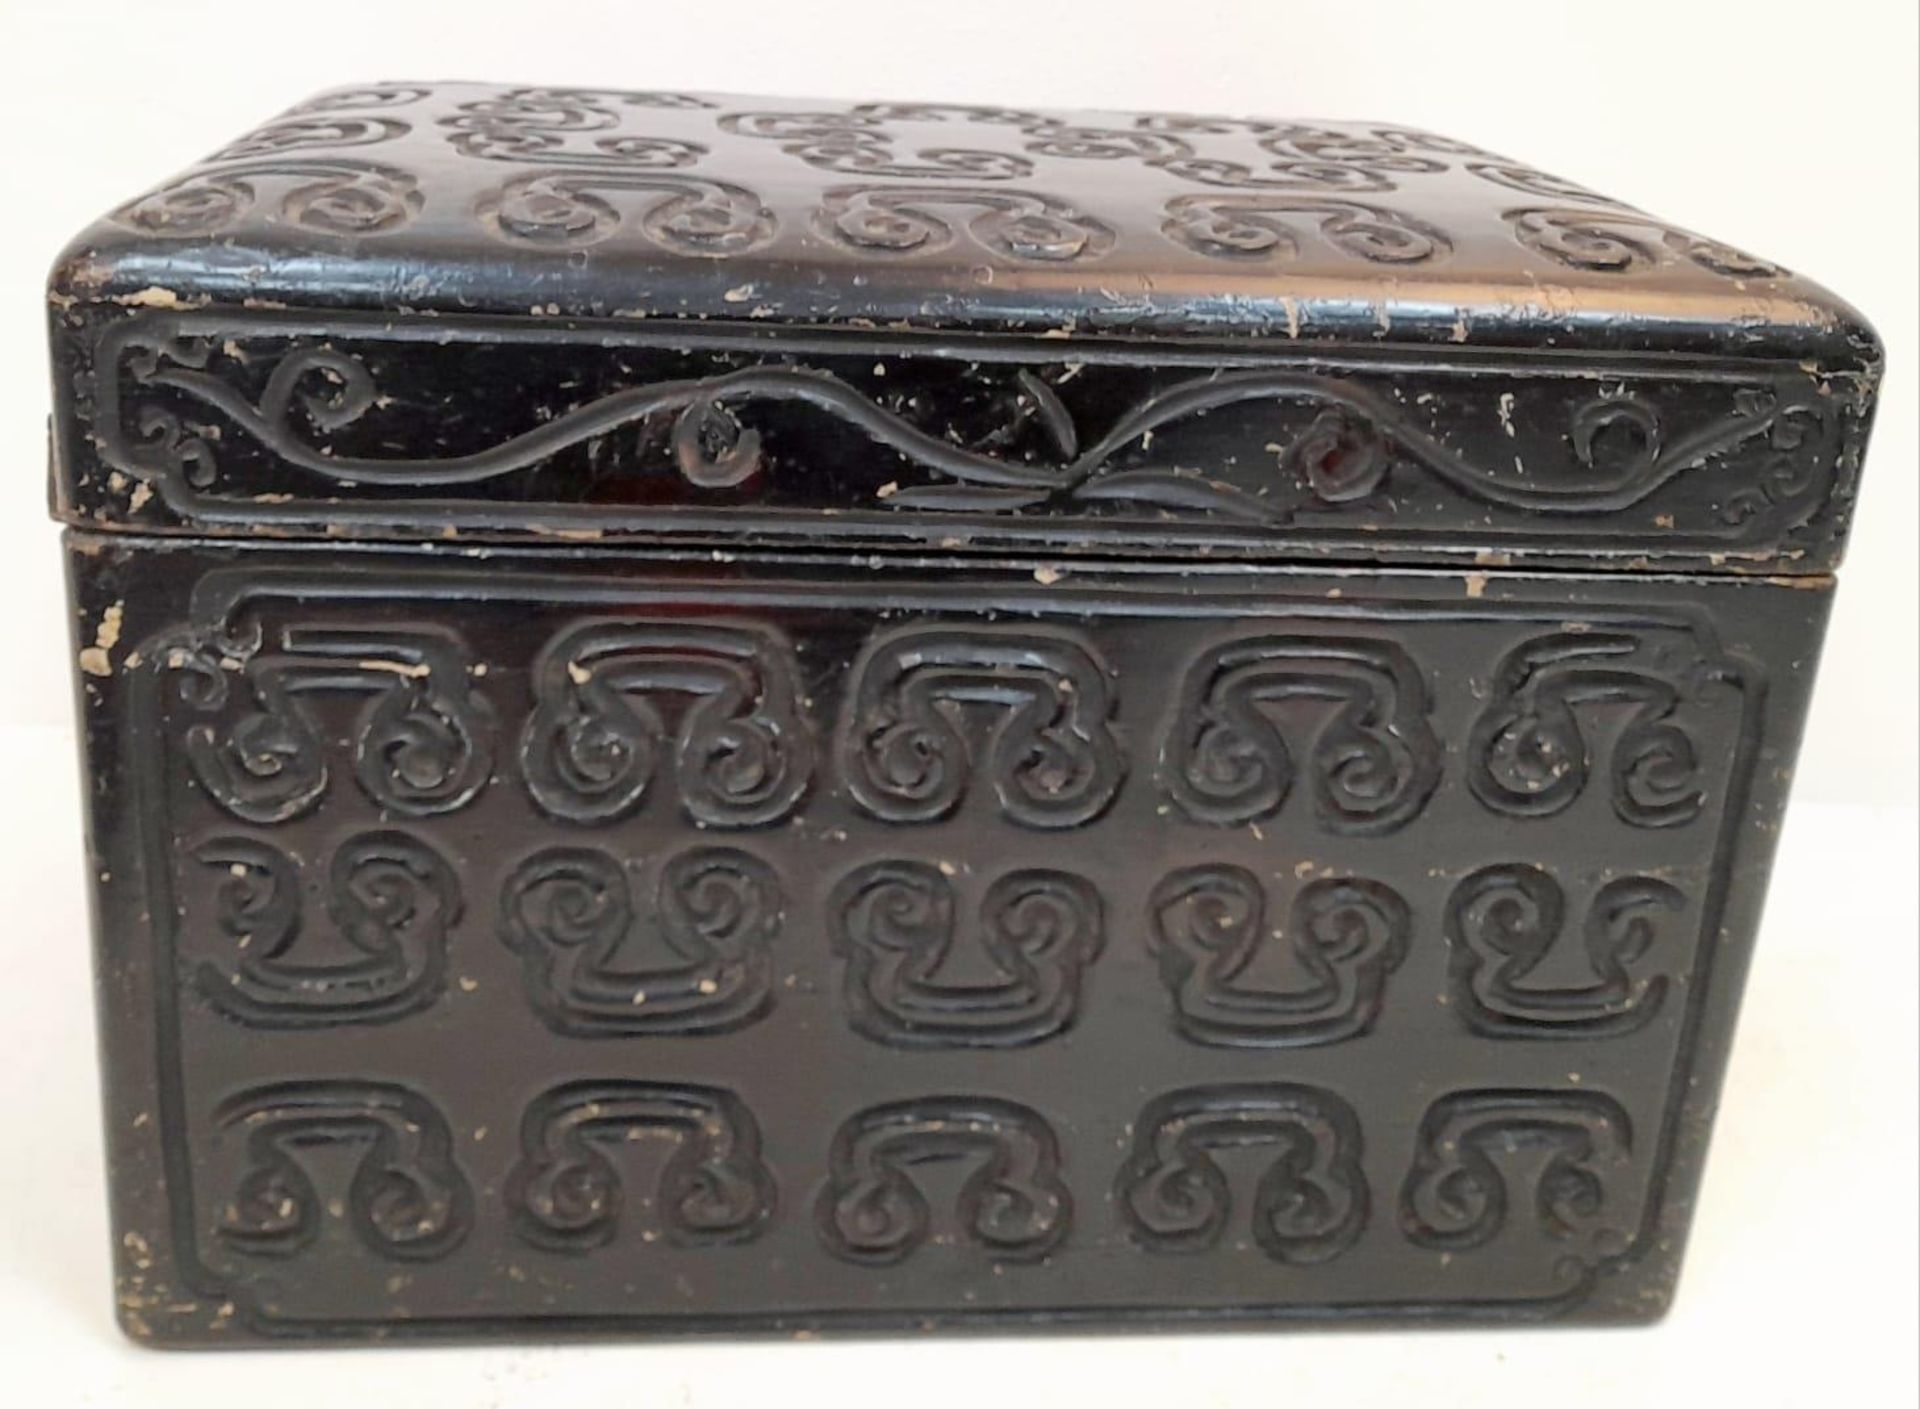 A Fascinating and Wonderful Antique Chinese Large Lacquered Box - 18th century, possibly earlier. - Image 6 of 7